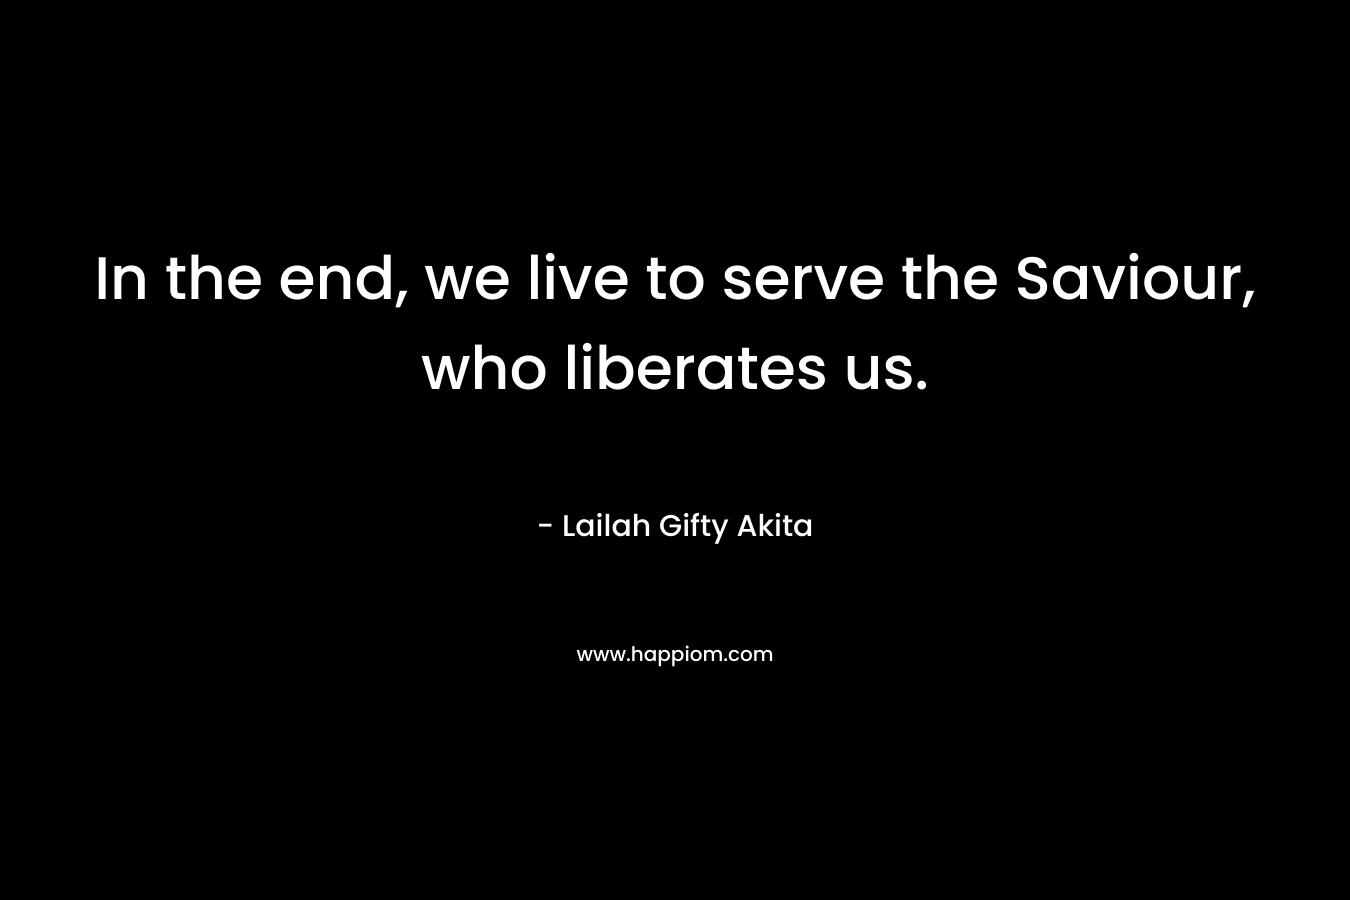 In the end, we live to serve the Saviour, who liberates us.